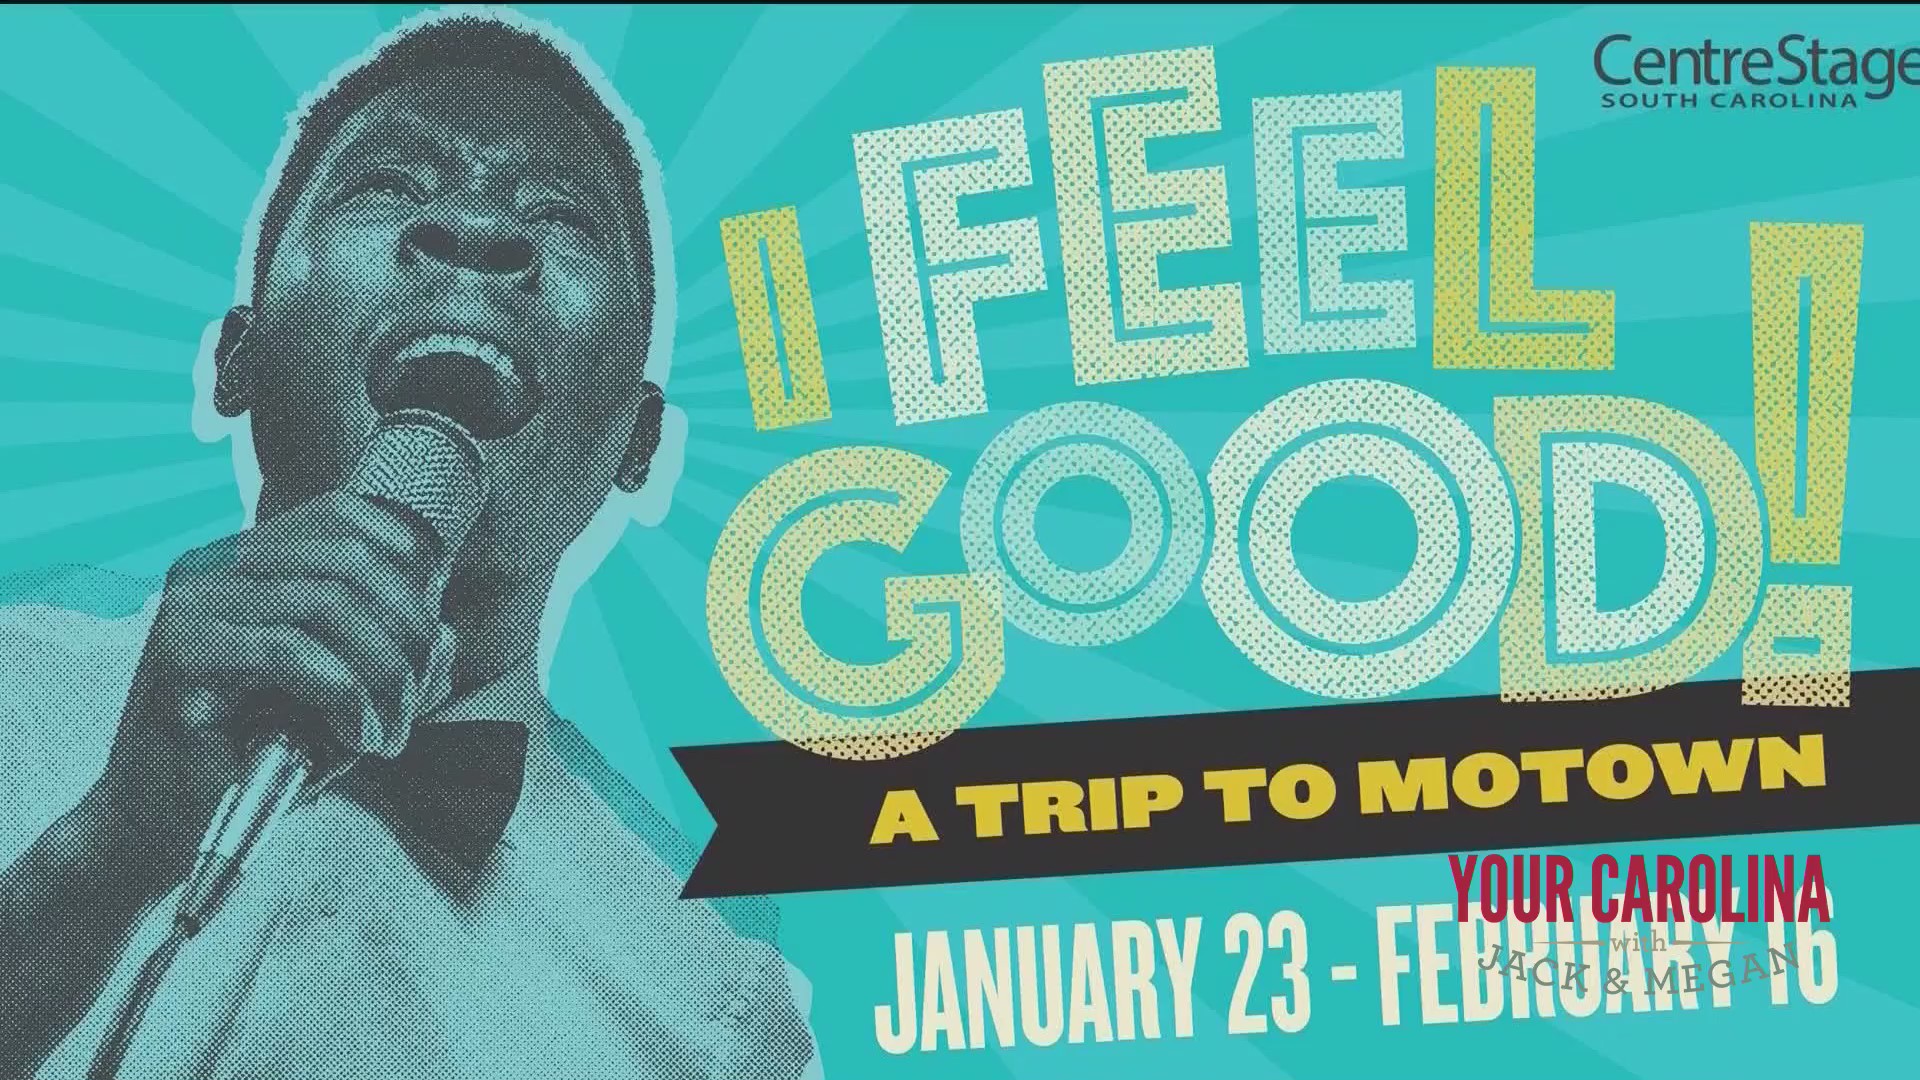 Thumbnail for the video titled "Centre Stage Presents "I Feel Good: A Trip to Motown""